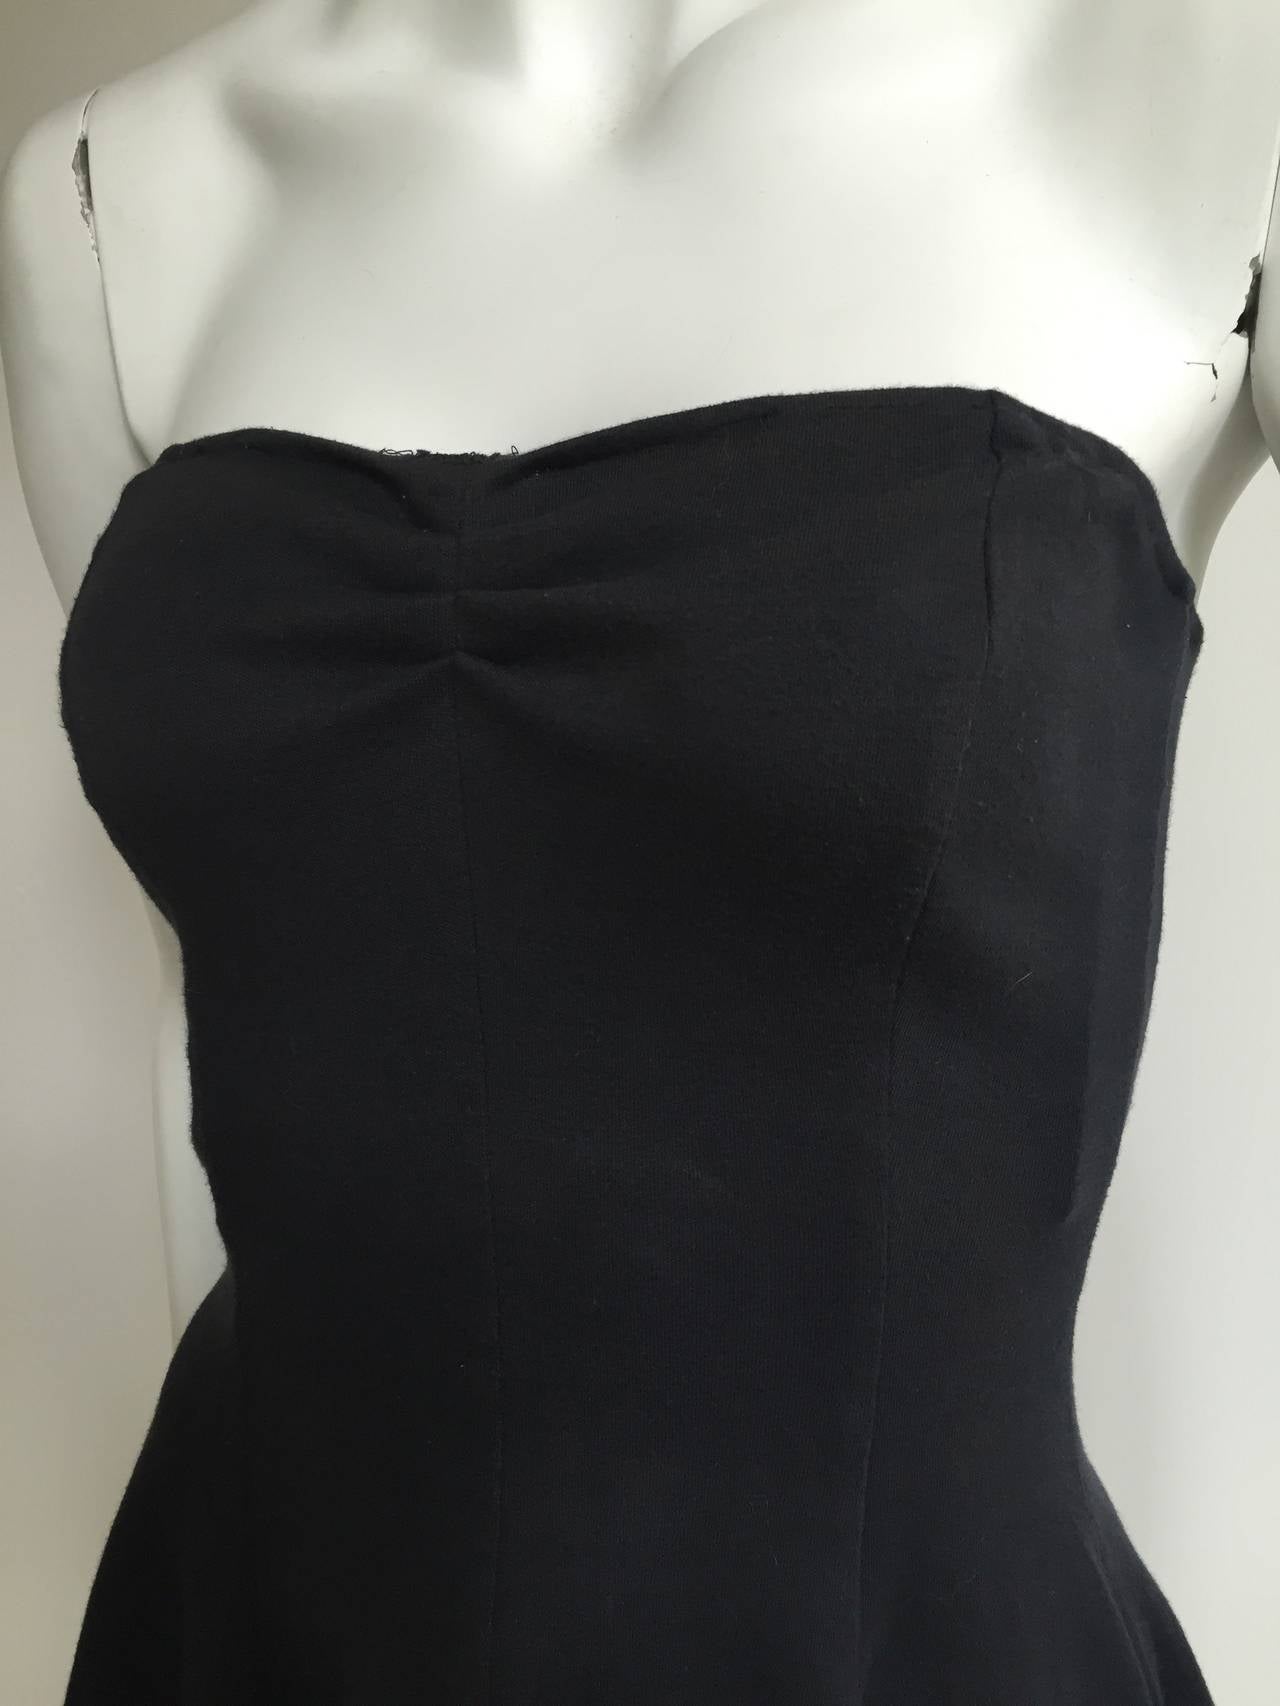 Women's Norma Kamali Black Cotton Strapless Top Size Small. For Sale